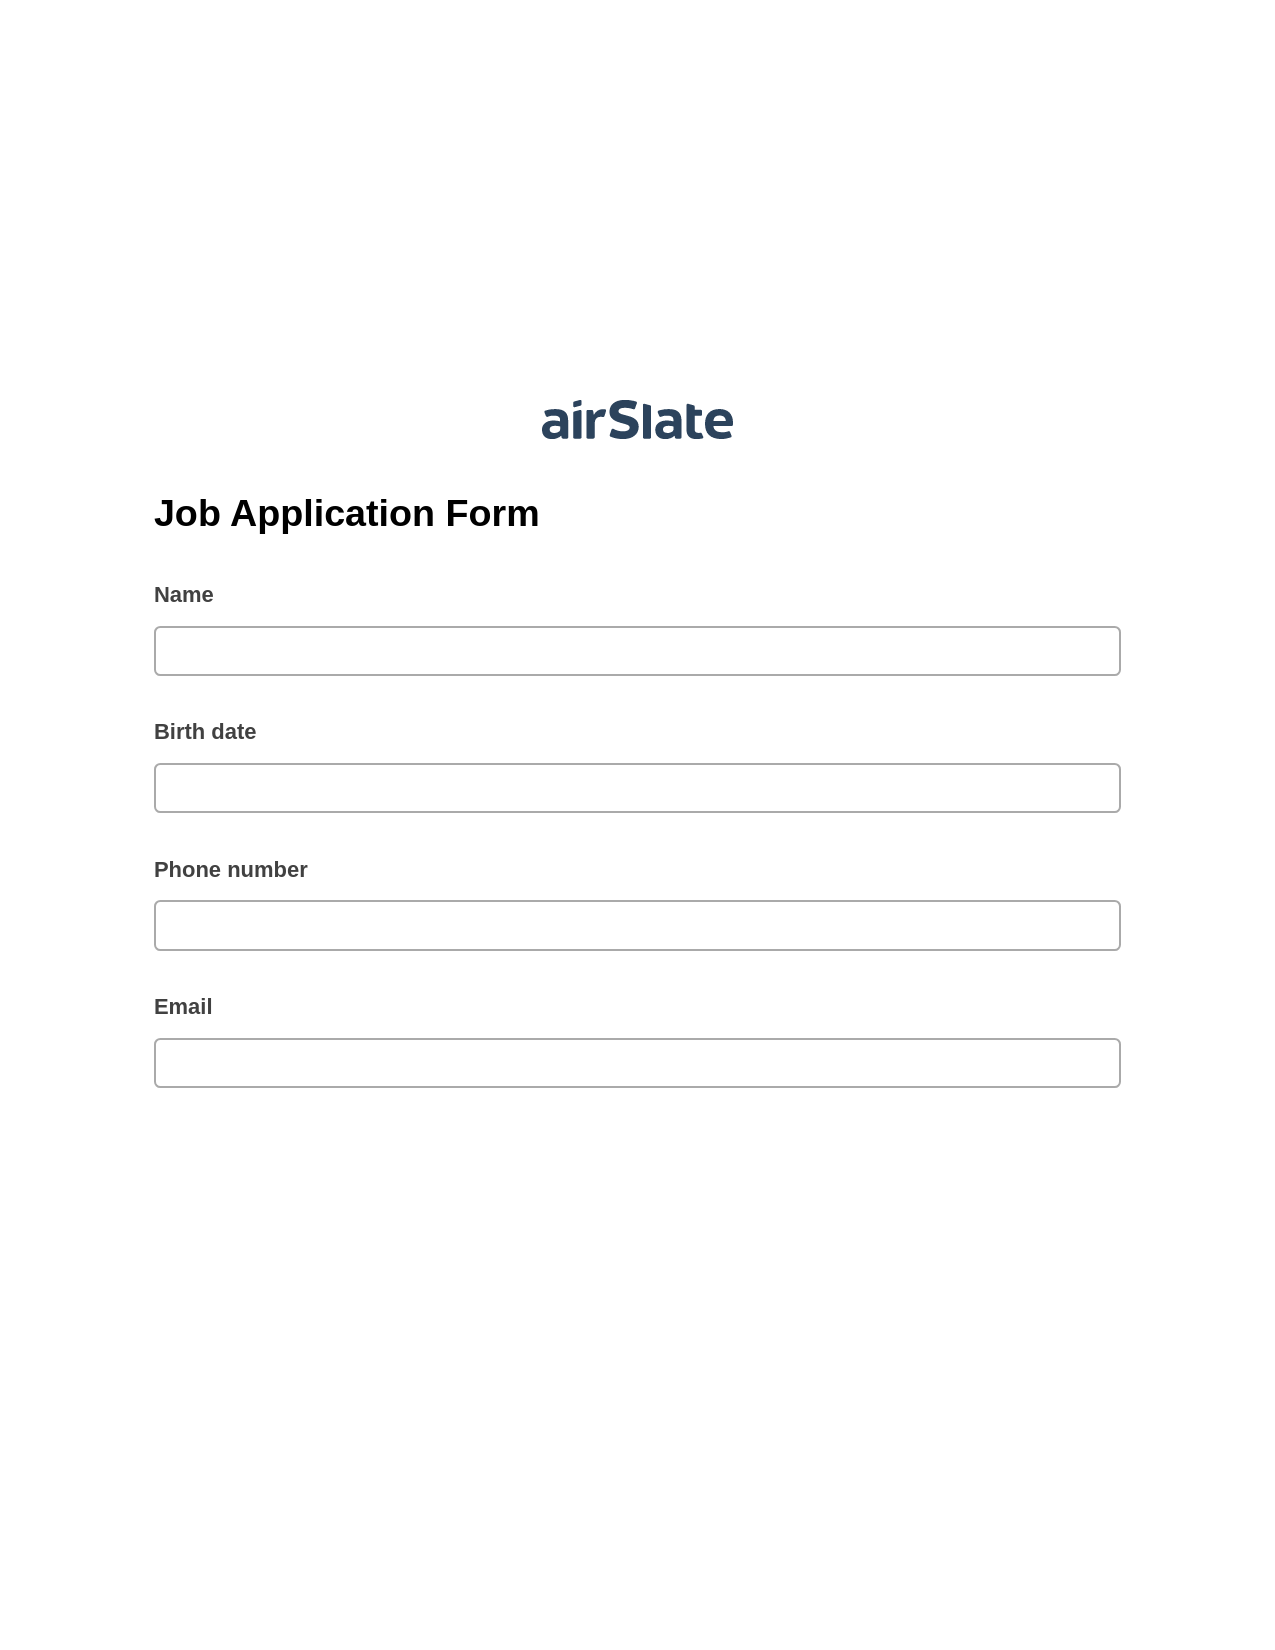 Job Application Form Pre-fill from Excel Spreadsheet Bot, Pre-fill with Custom Data Bot, Export to MySQL Bot